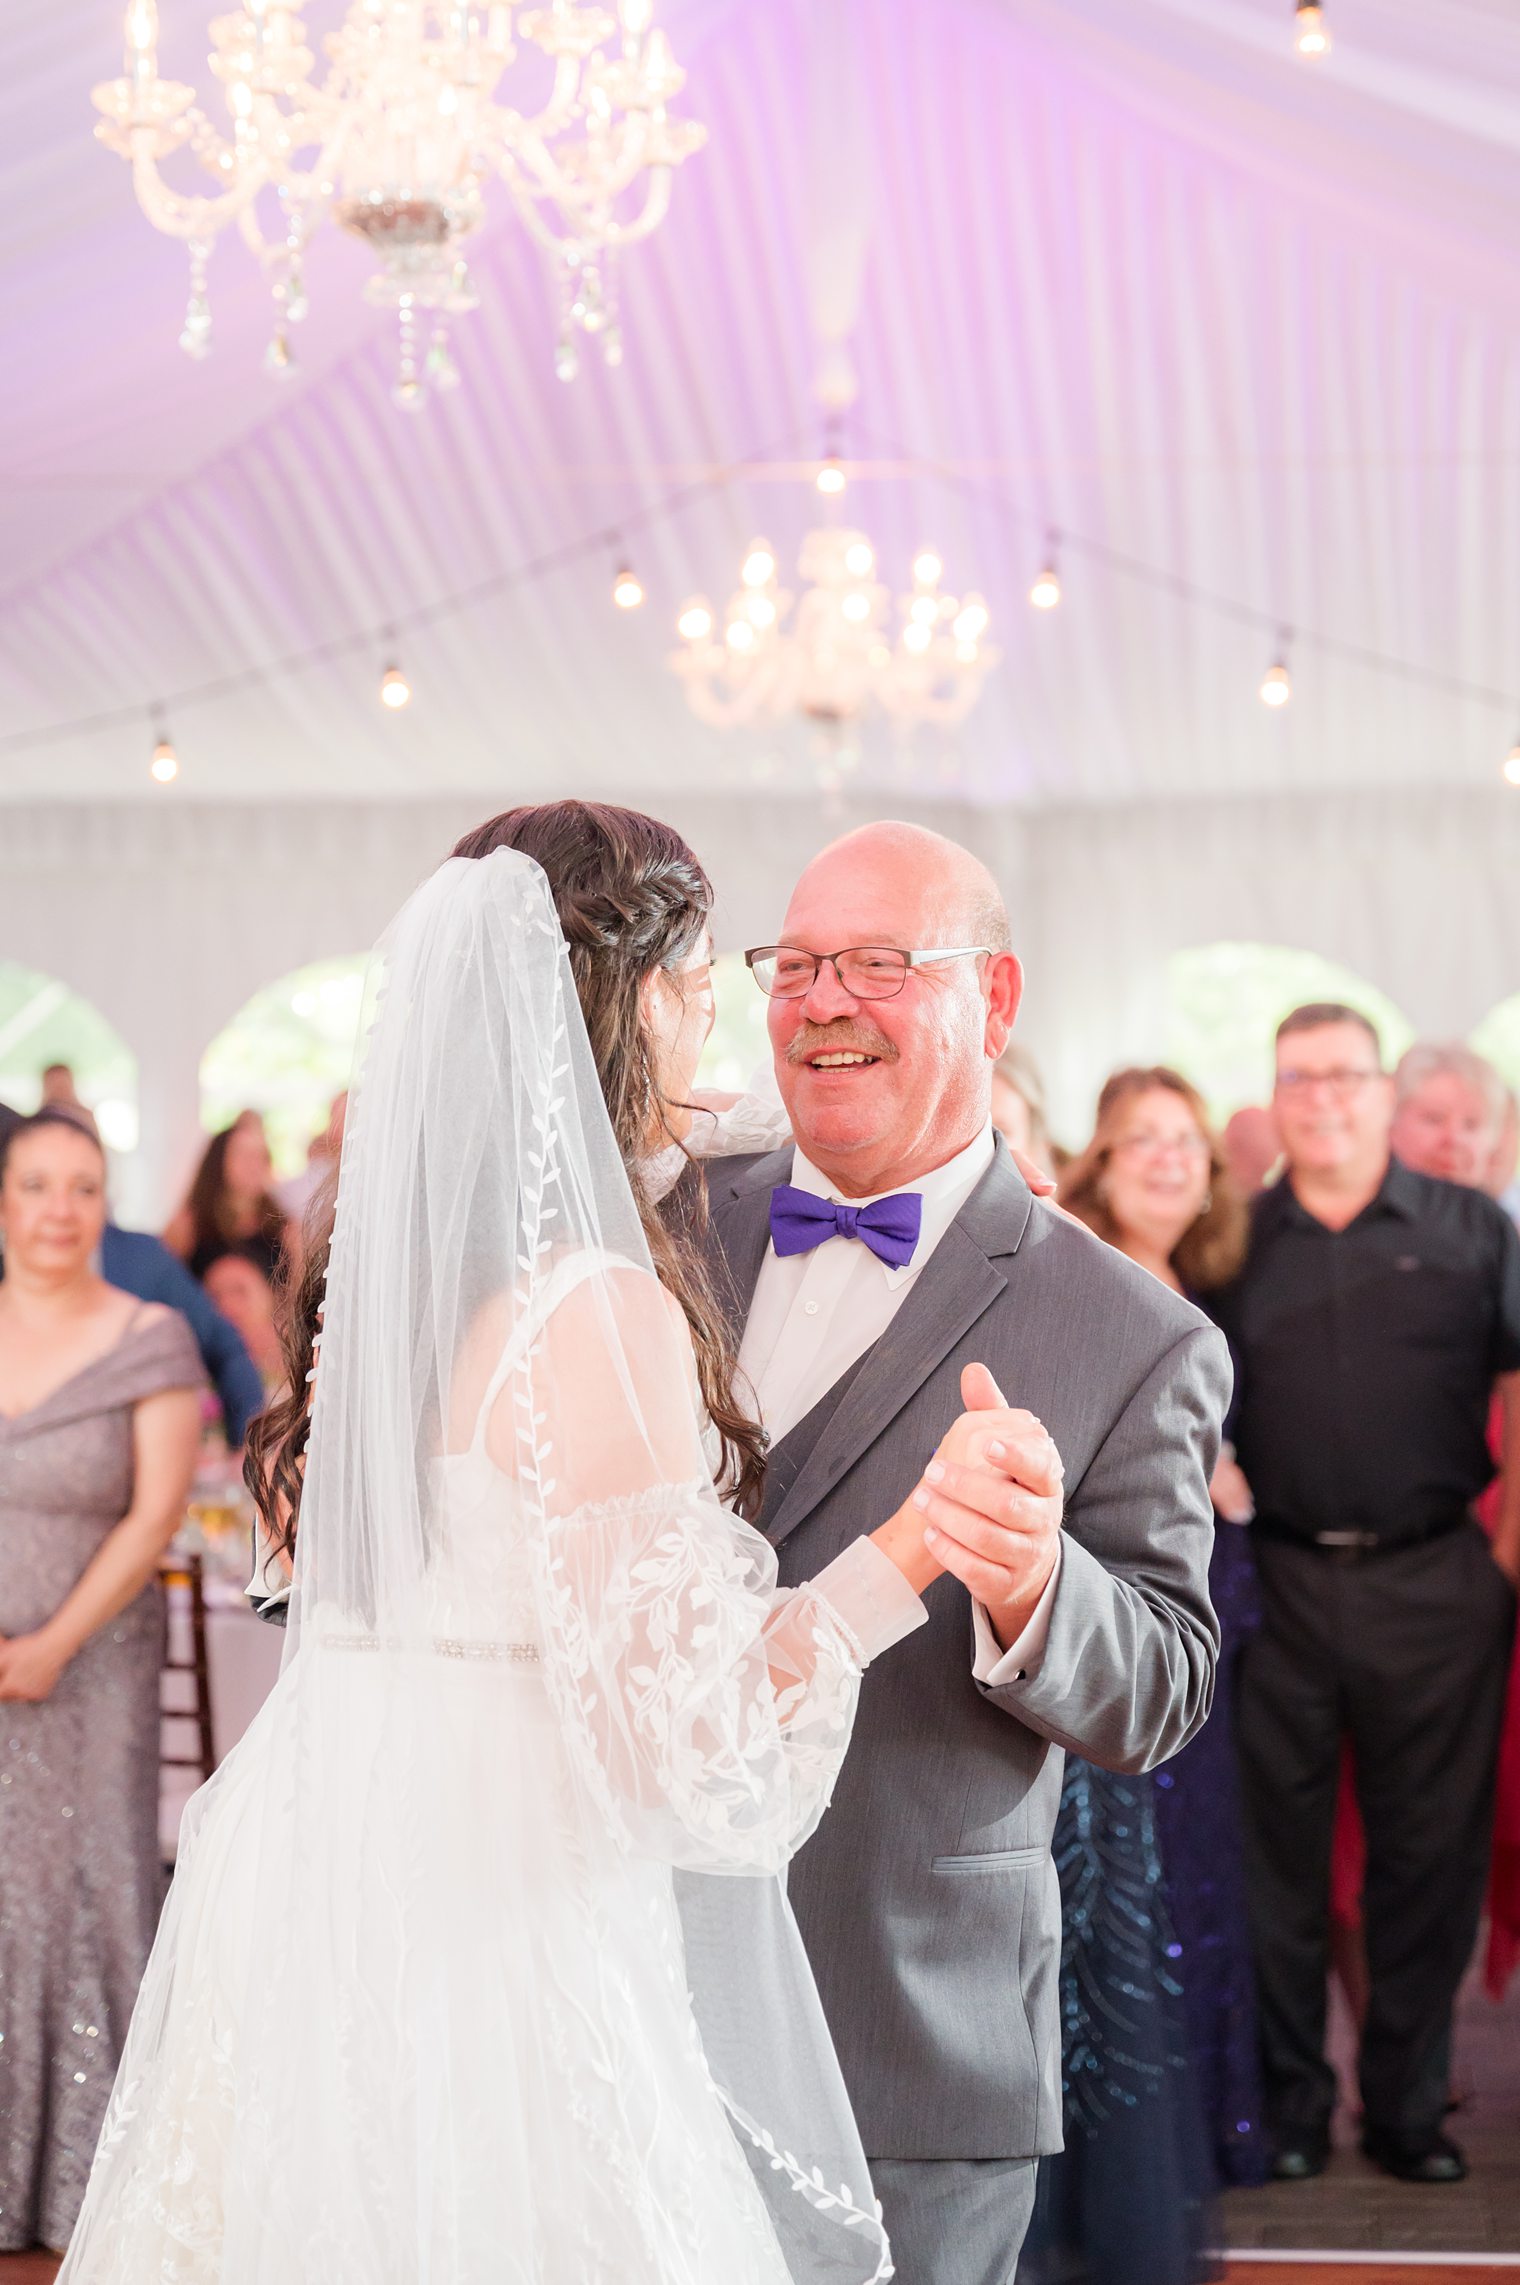 Brides dancing with her father for the first time as Mrs at Windows on the Water Frogbridge